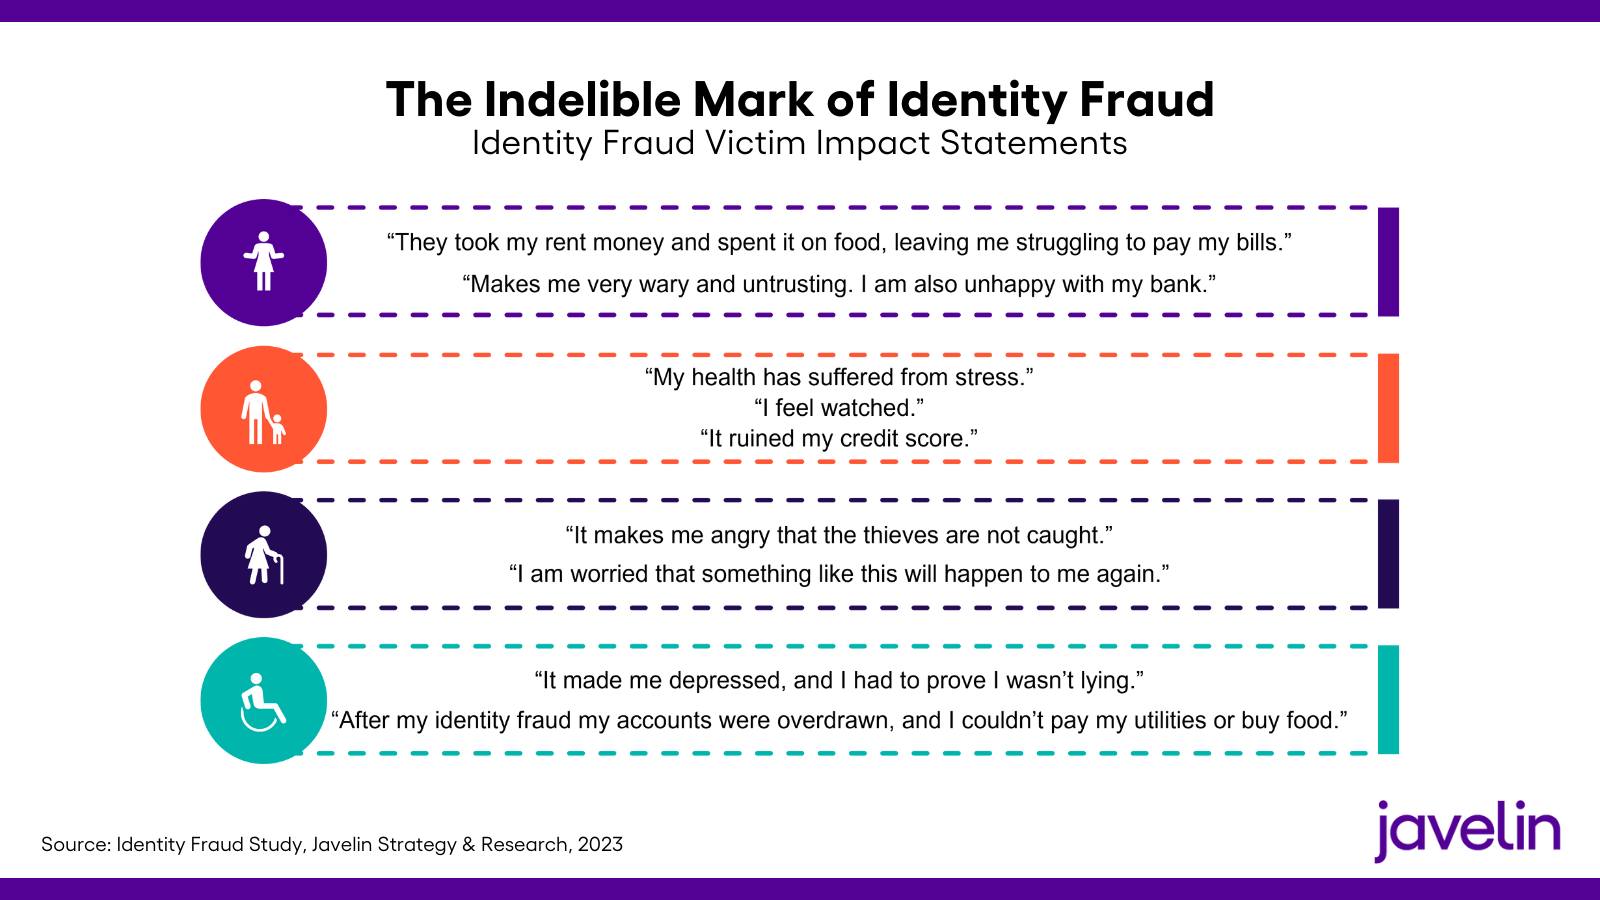 The Indeliable Mark of Identity Fraud